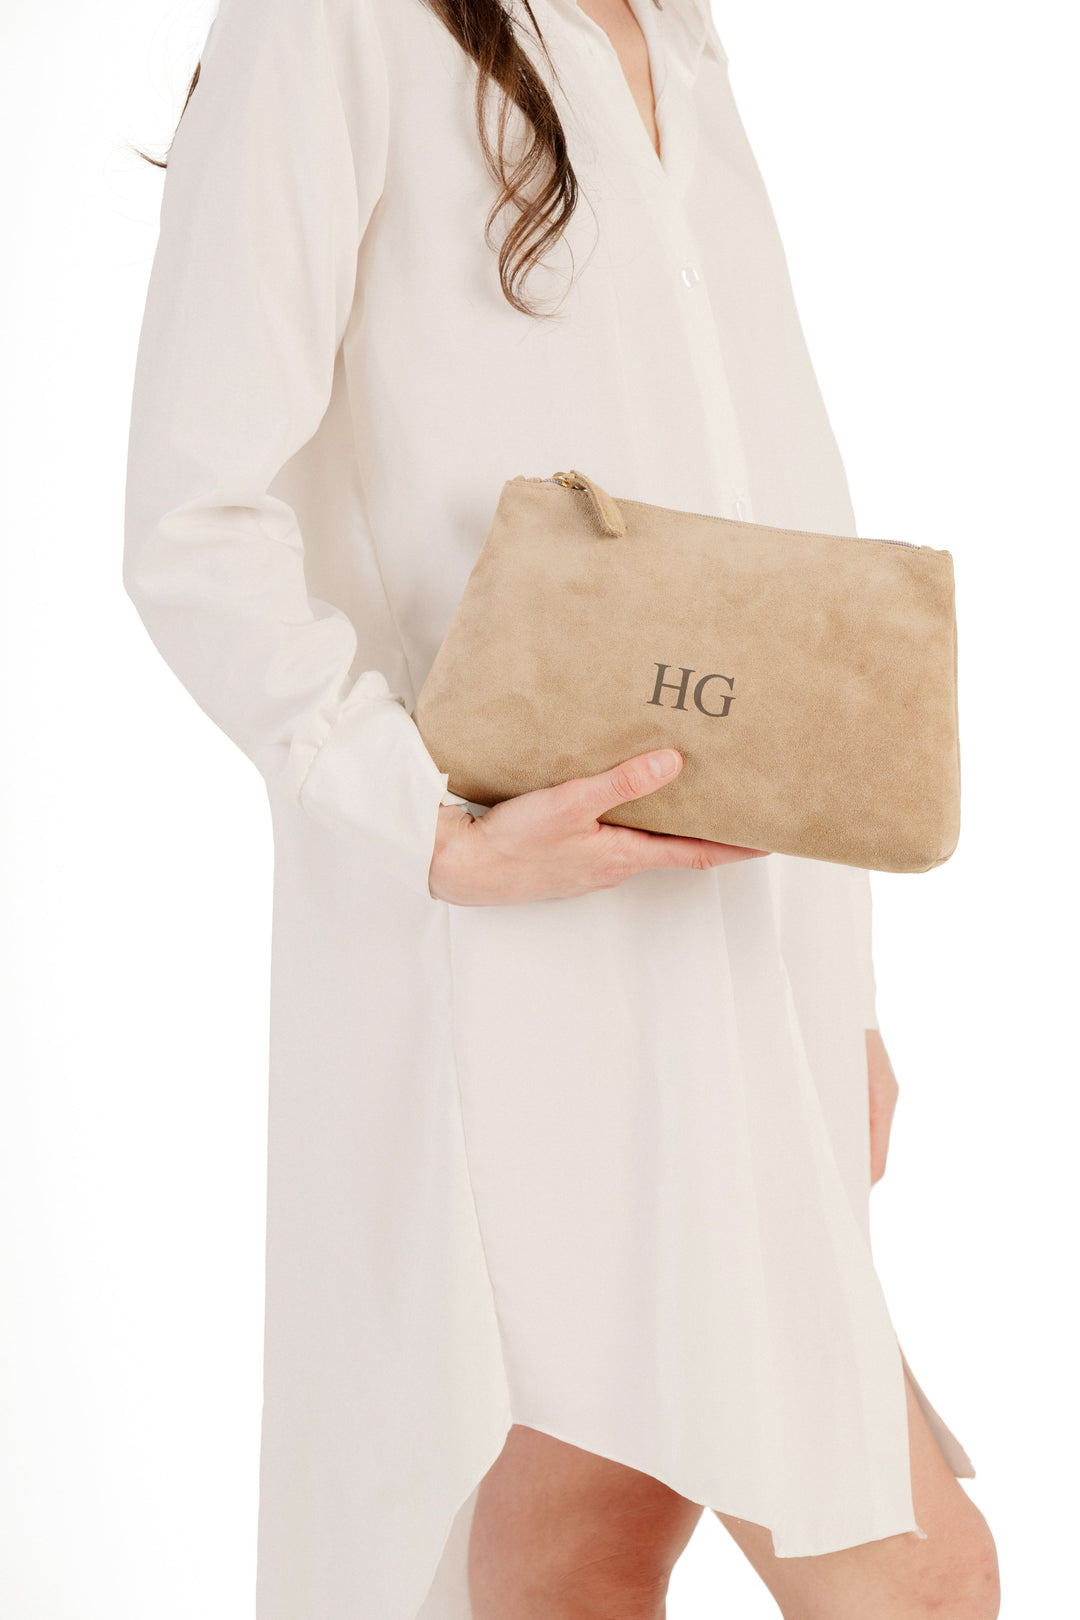 Person holding a personalized beige clutch with initials HG while wearing a white dress